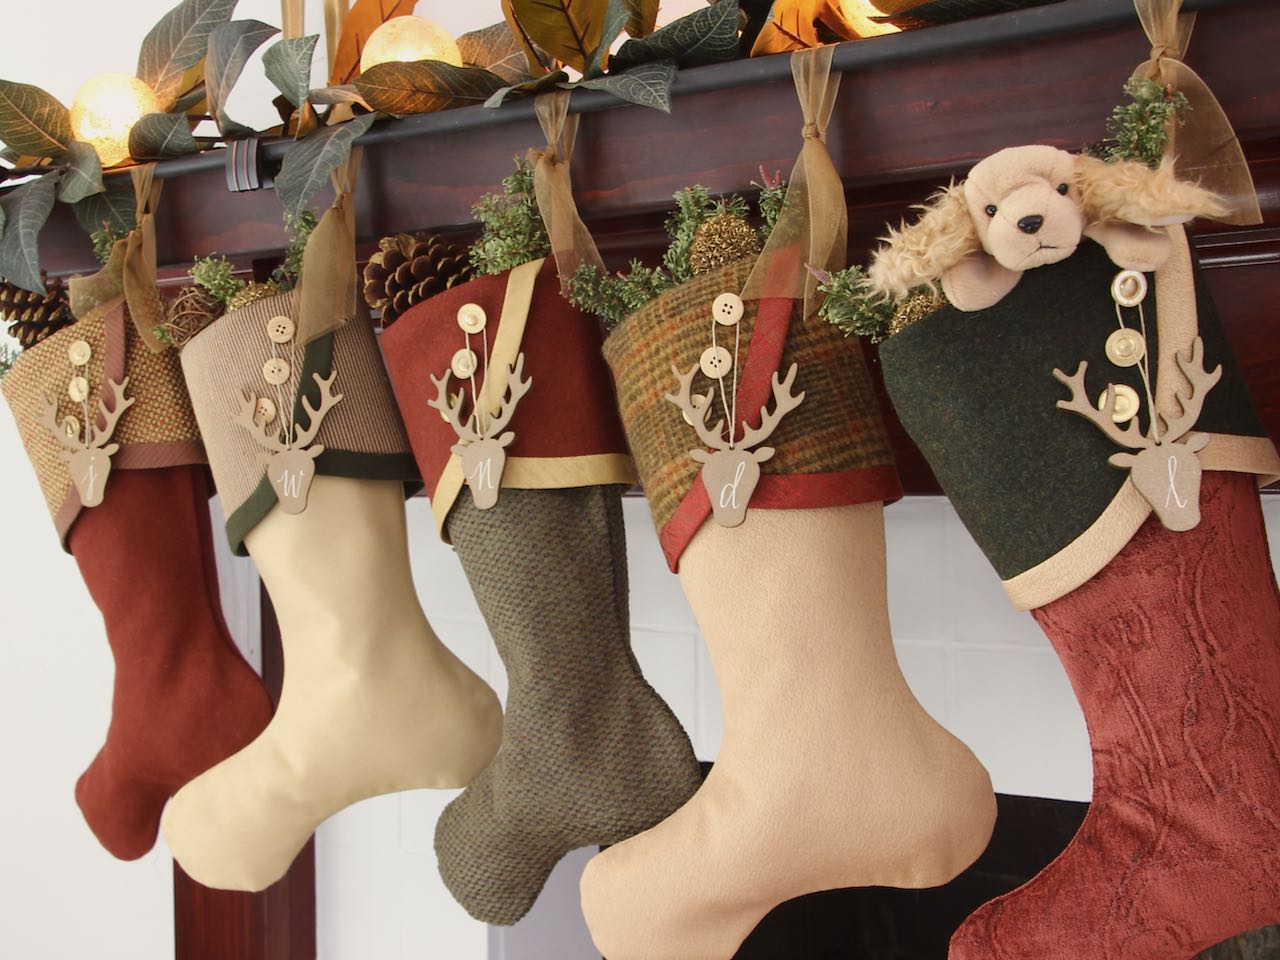 5 coordinating yet unique Christmas stockings are hanging from a mantel. Wood stag head shaped name tags hang from the top of three buttons on each cuff